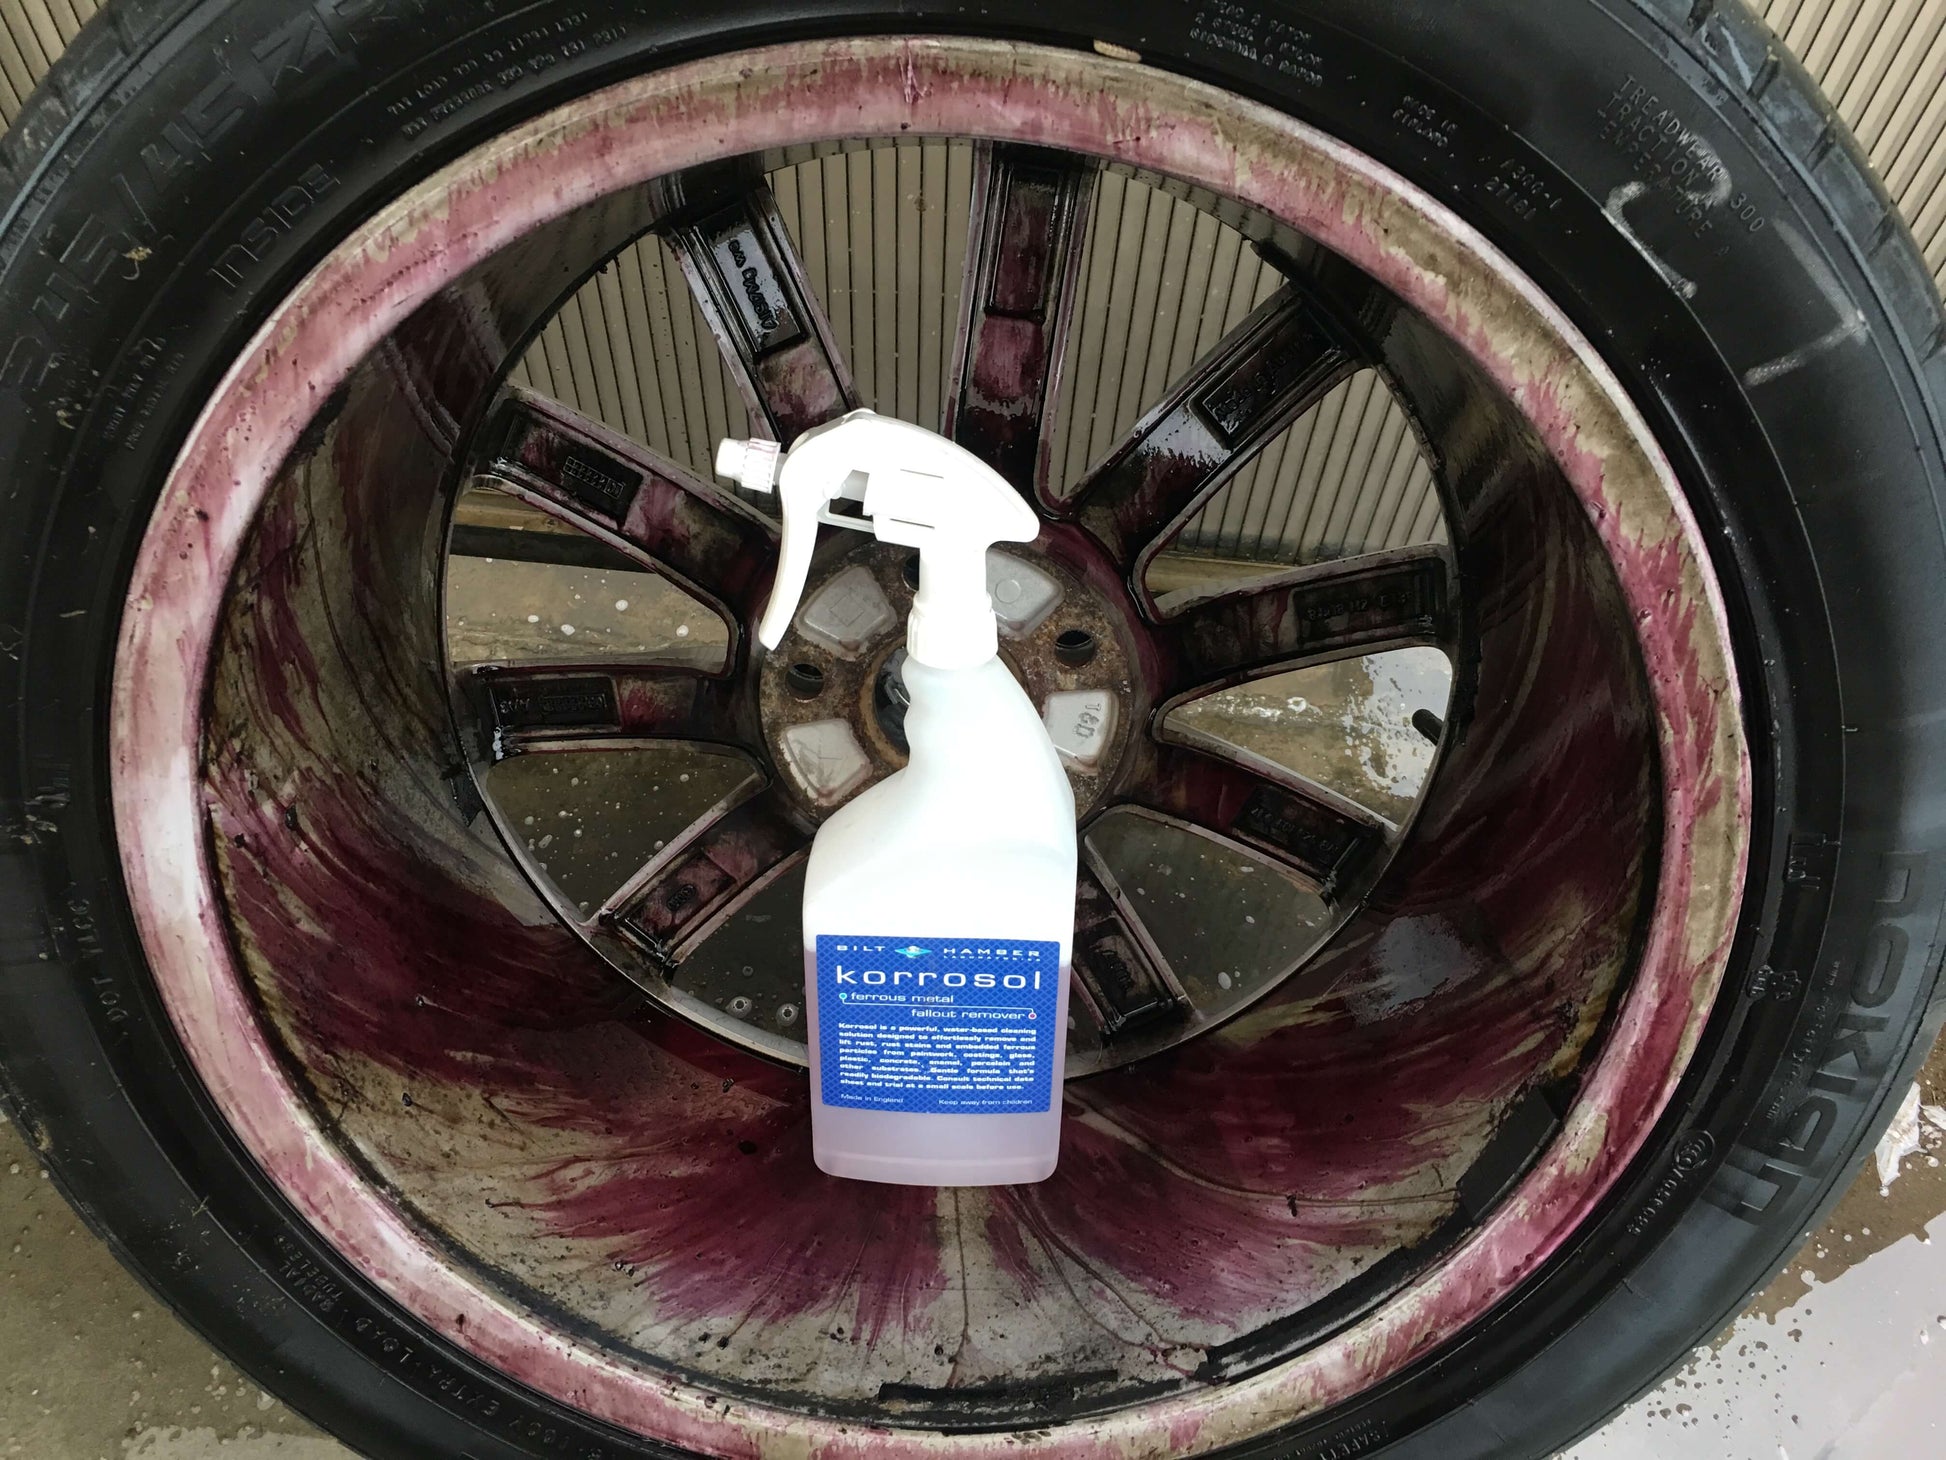 Alloy Wheel with Korrosol Iron remover. Bilt Hamber Korrosol. Autoglym Magma. Iron remover. Fallout remover. Wheel cleaner turn purple. Colour changing formula